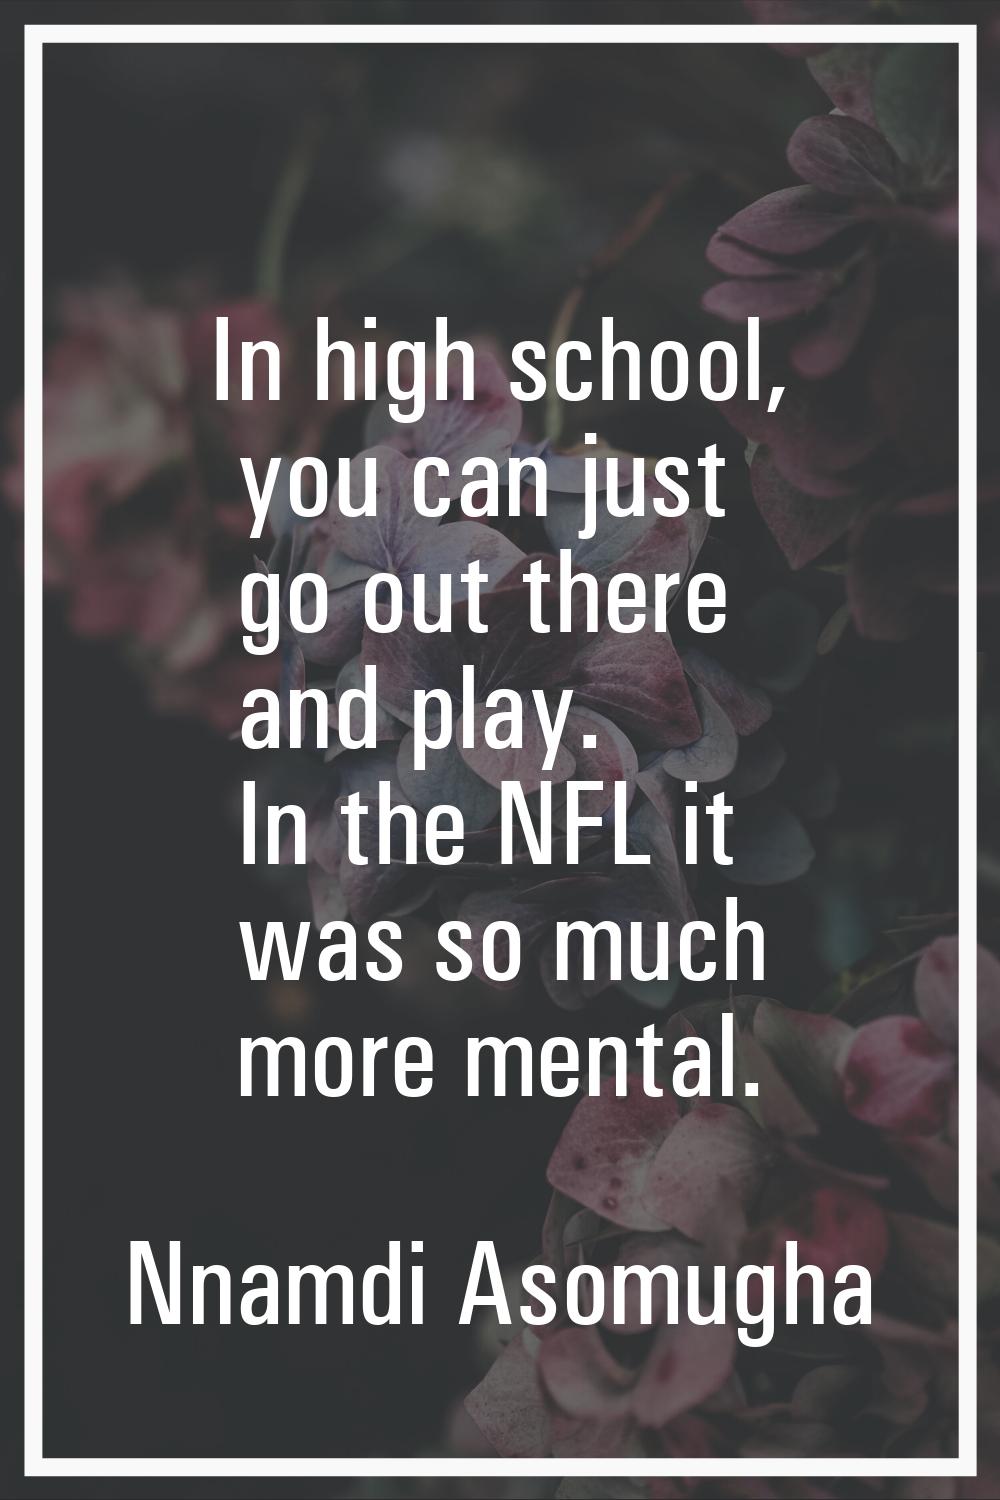 In high school, you can just go out there and play. In the NFL it was so much more mental.